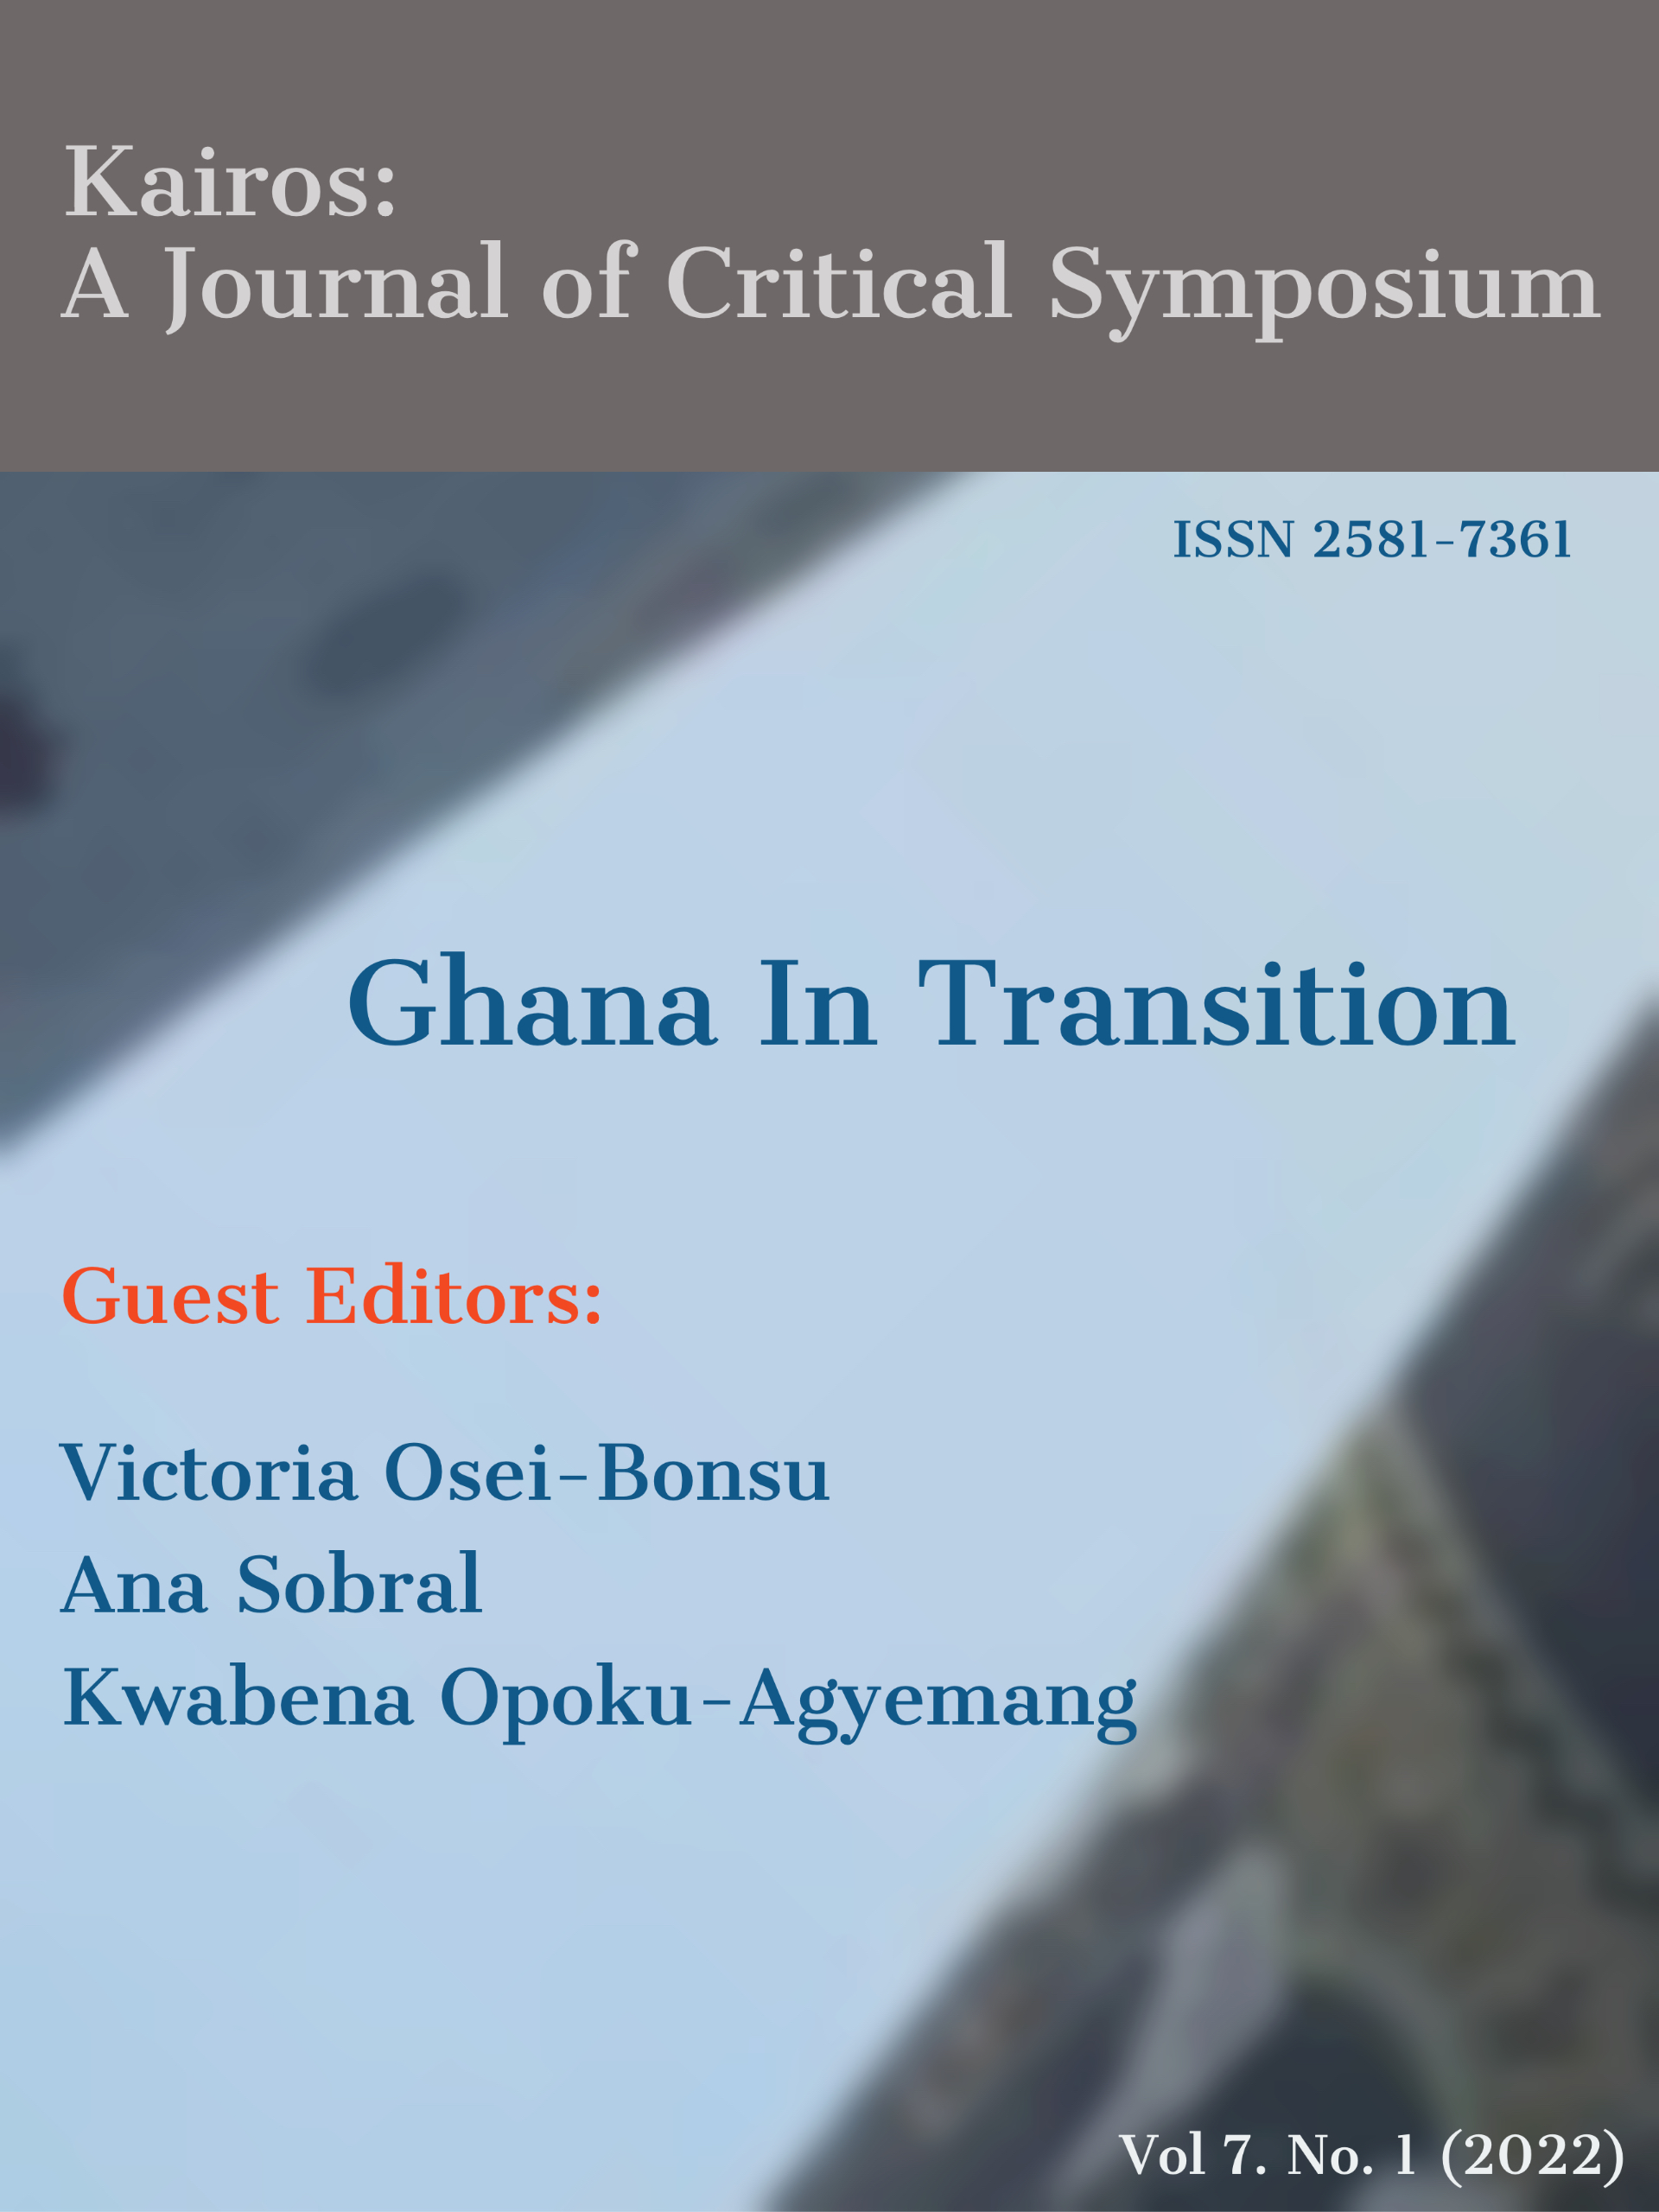 					View Vol. 7 No. 1 (2022): Special Issue: Ghana In Transition
				